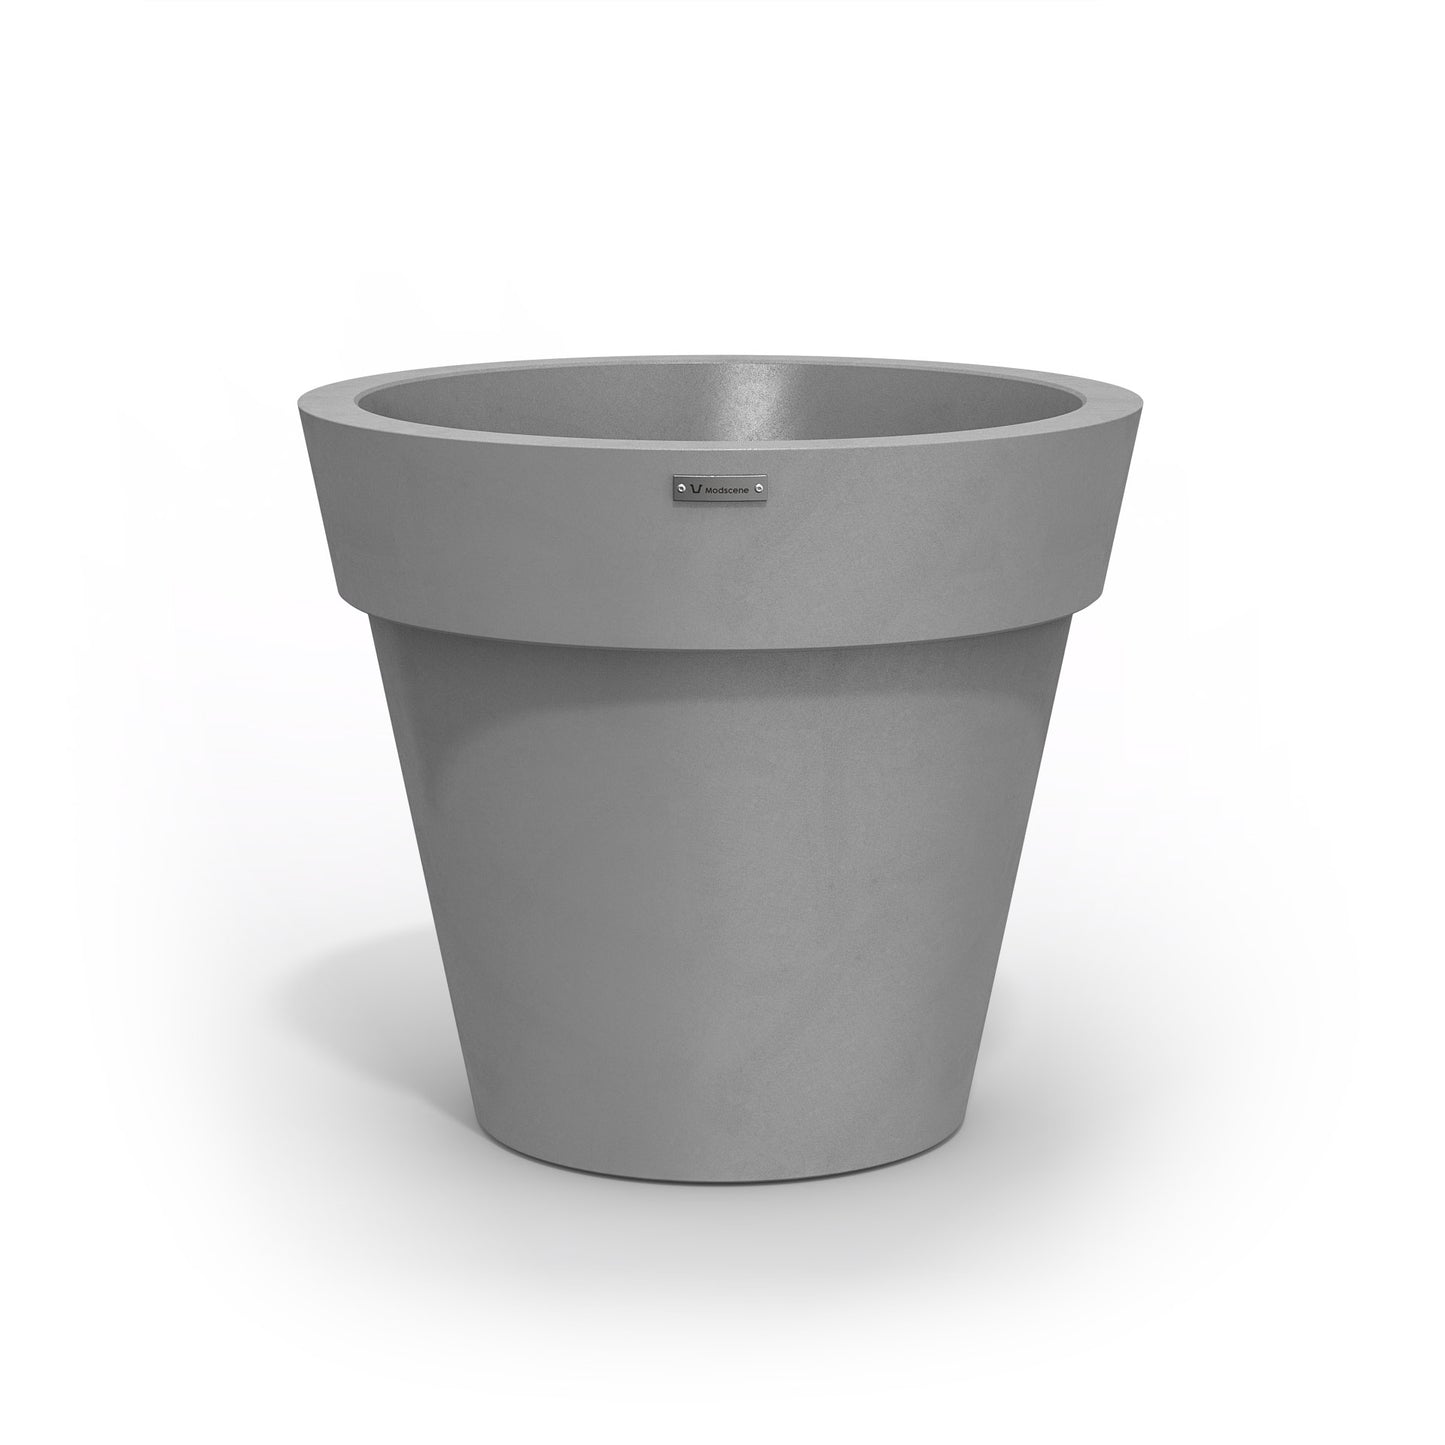 A Modscene plastic planter pot made in a light grey colour with a concrete look.